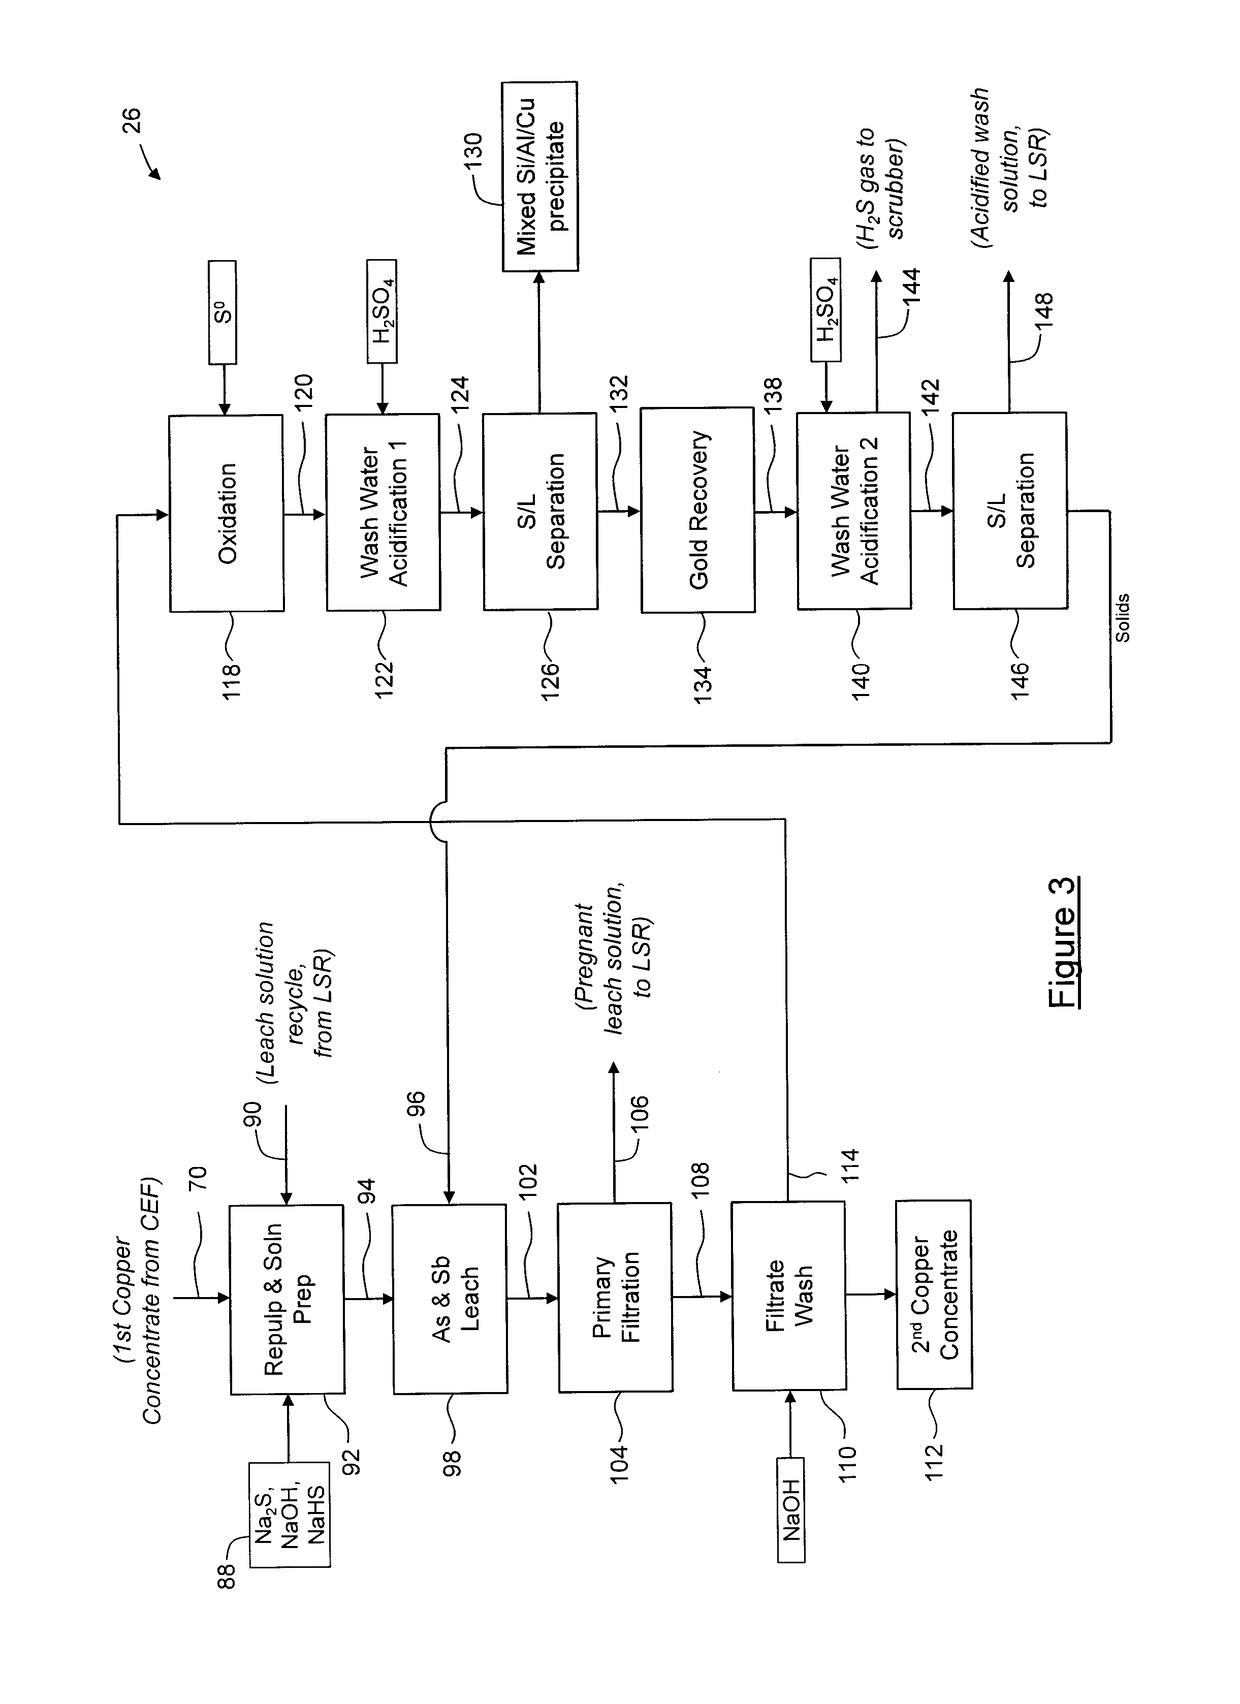 Process for separation of at least one metal sulfide from a mixed sulfide ore or concentrate